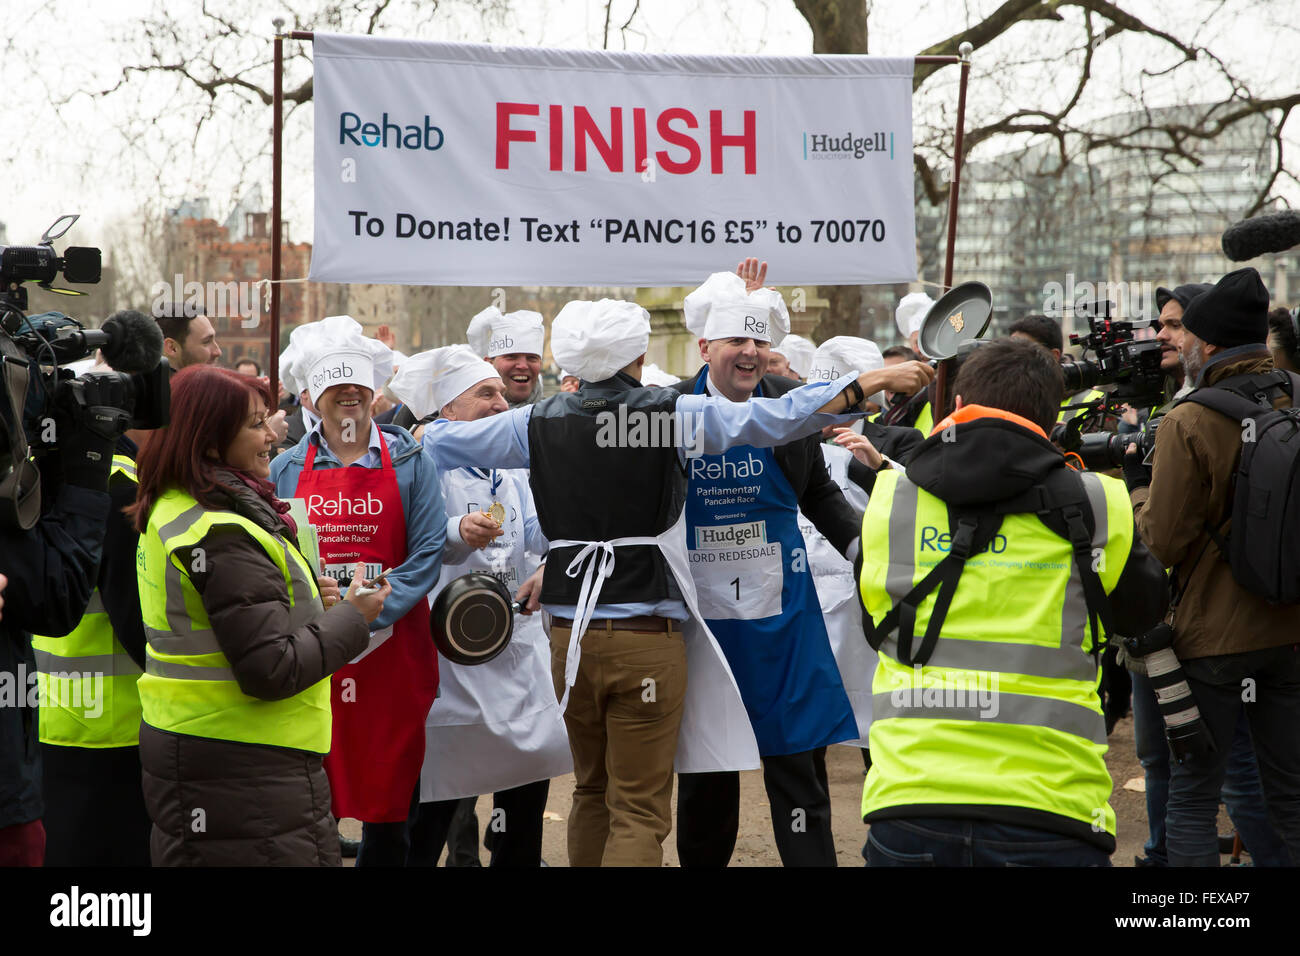 Westminster, London, UK. 9th February 2016. MP'S team celebrate after winning the Rehab Parliamentary Pancake Race 2016 as runners representing the House of Commons, the House of Lords and the Parliamentary Press Gallery raced against each other while tossing pancakes Credit:  Keith Larby/Alamy Live News Stock Photo